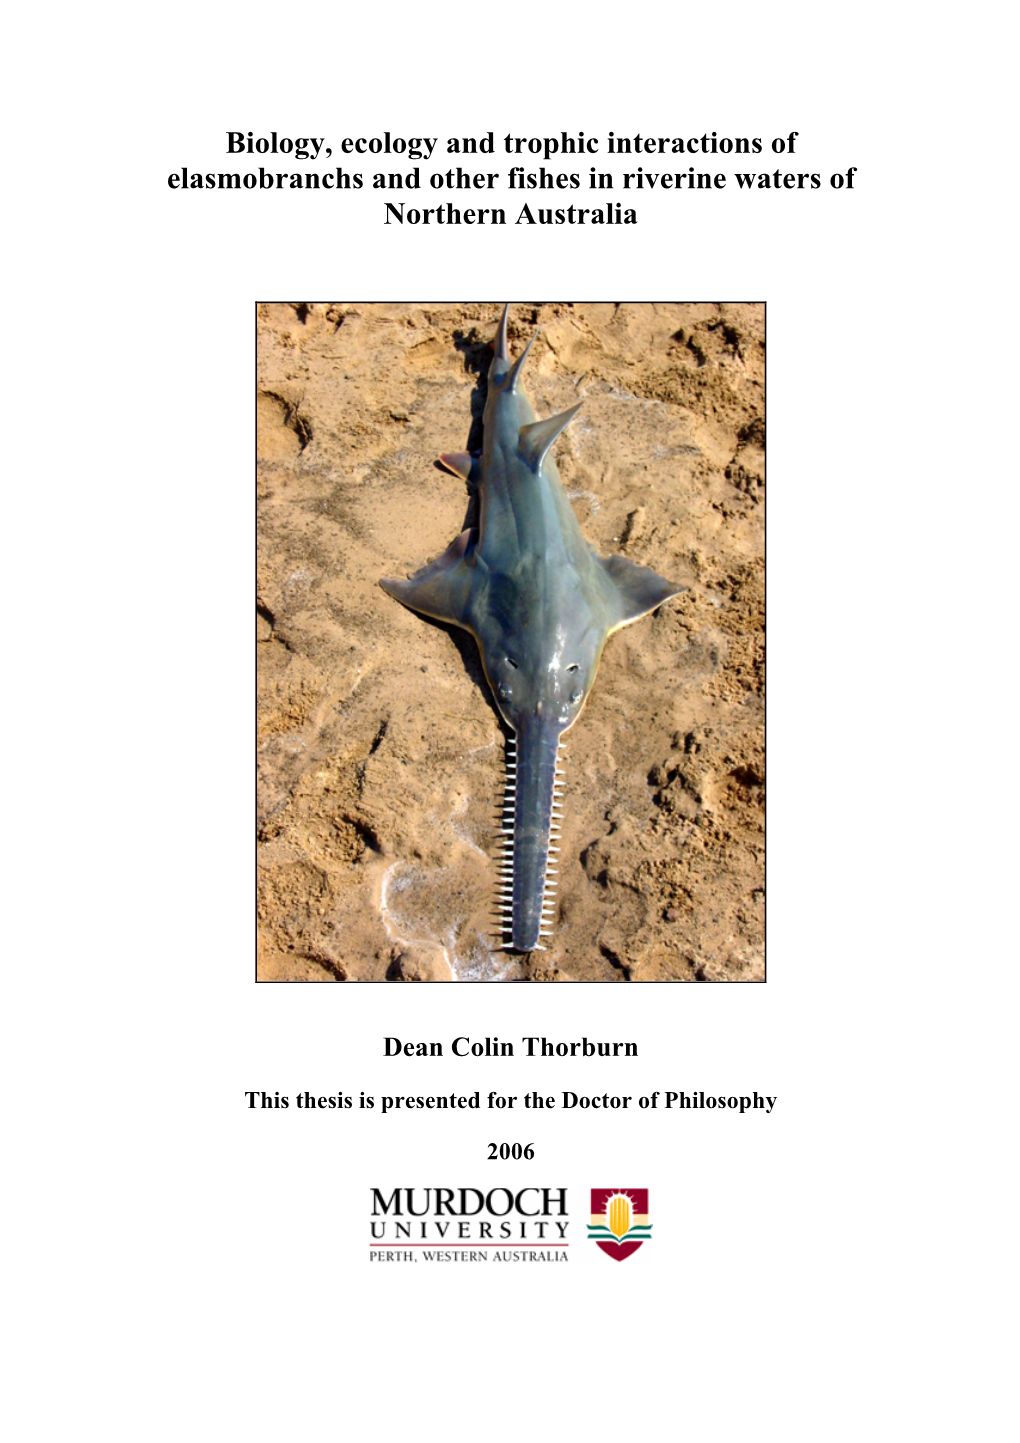 Biology, Ecology and Trophic Relationship of Elasmobranchs, And